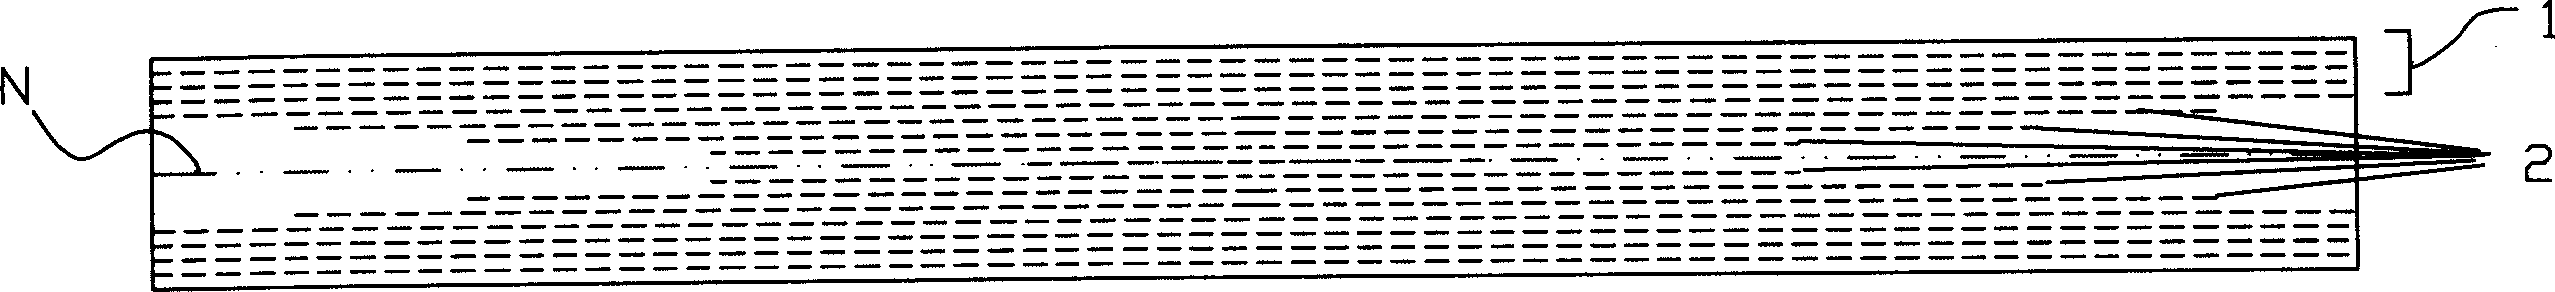 Method for producing glass fiber reinforced plastic composite material plate spring